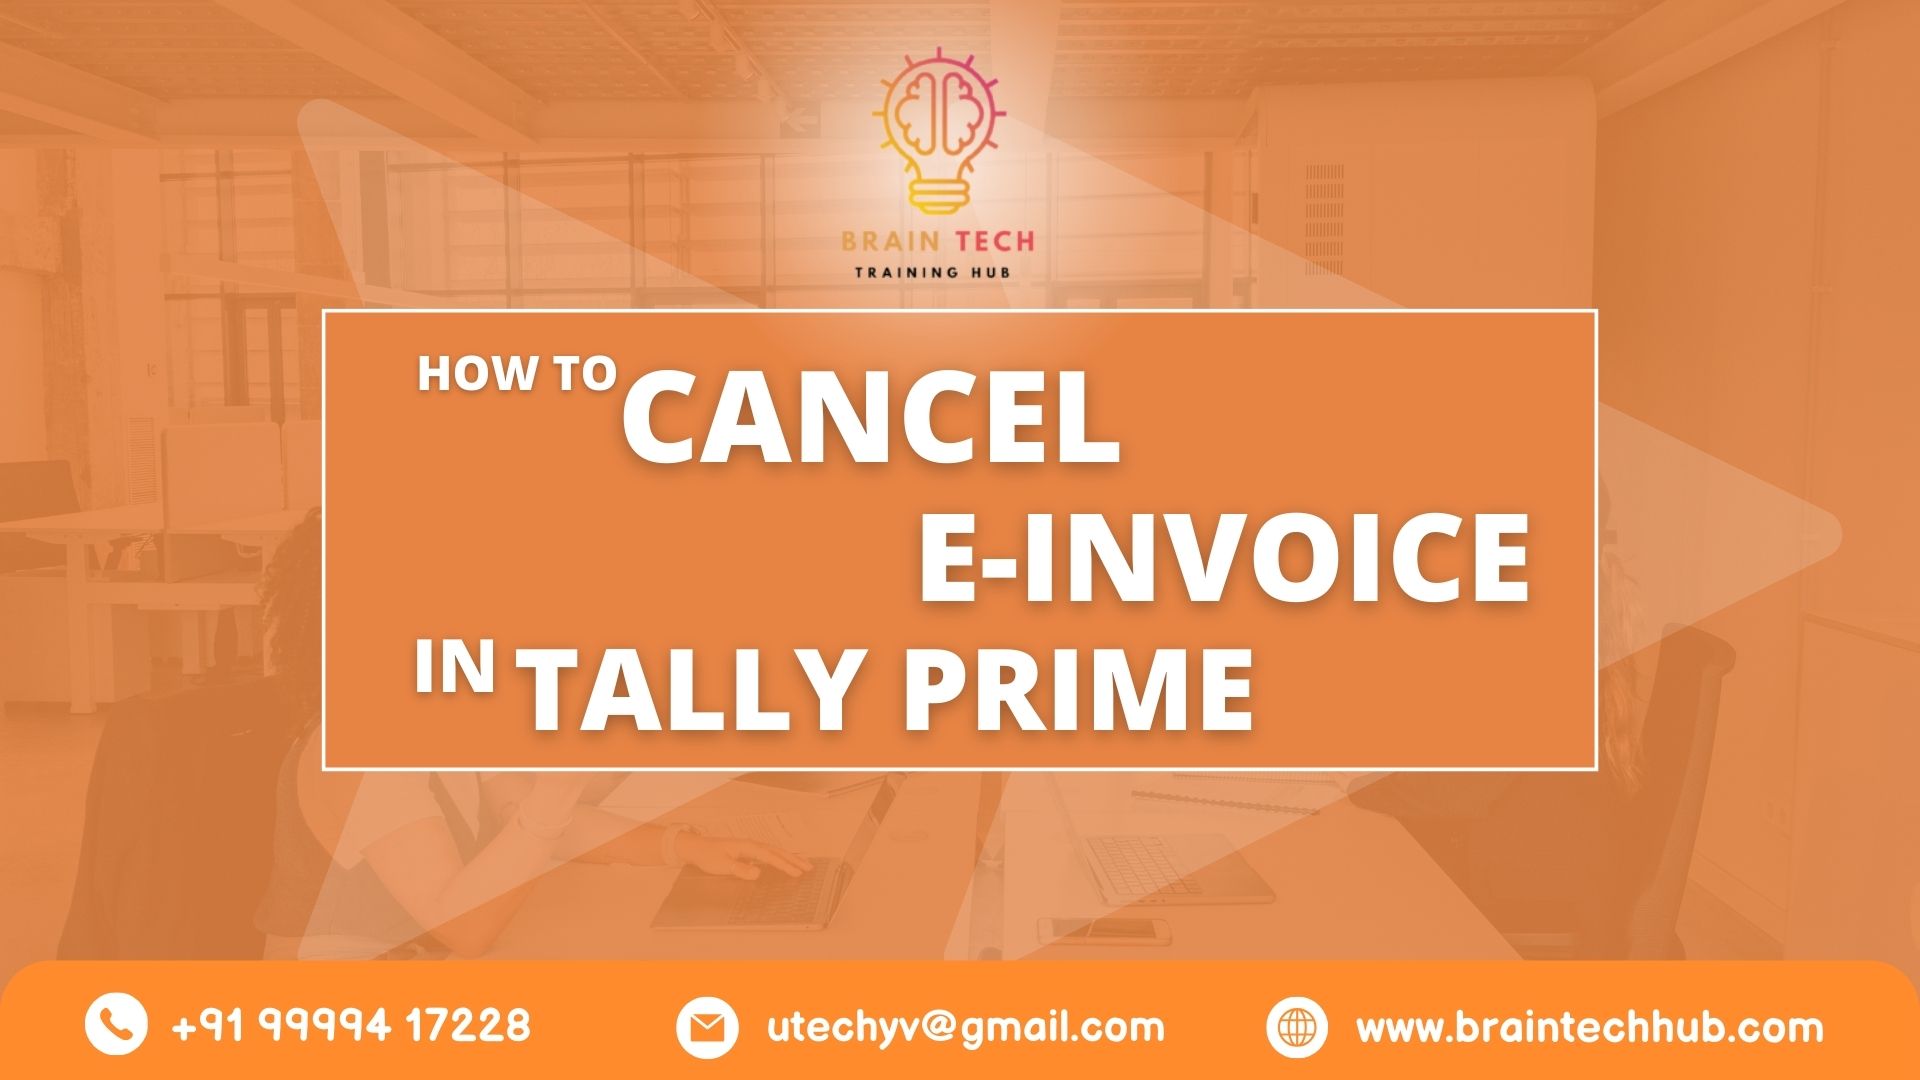 How To Cancel E-Invoice In Tally Prime